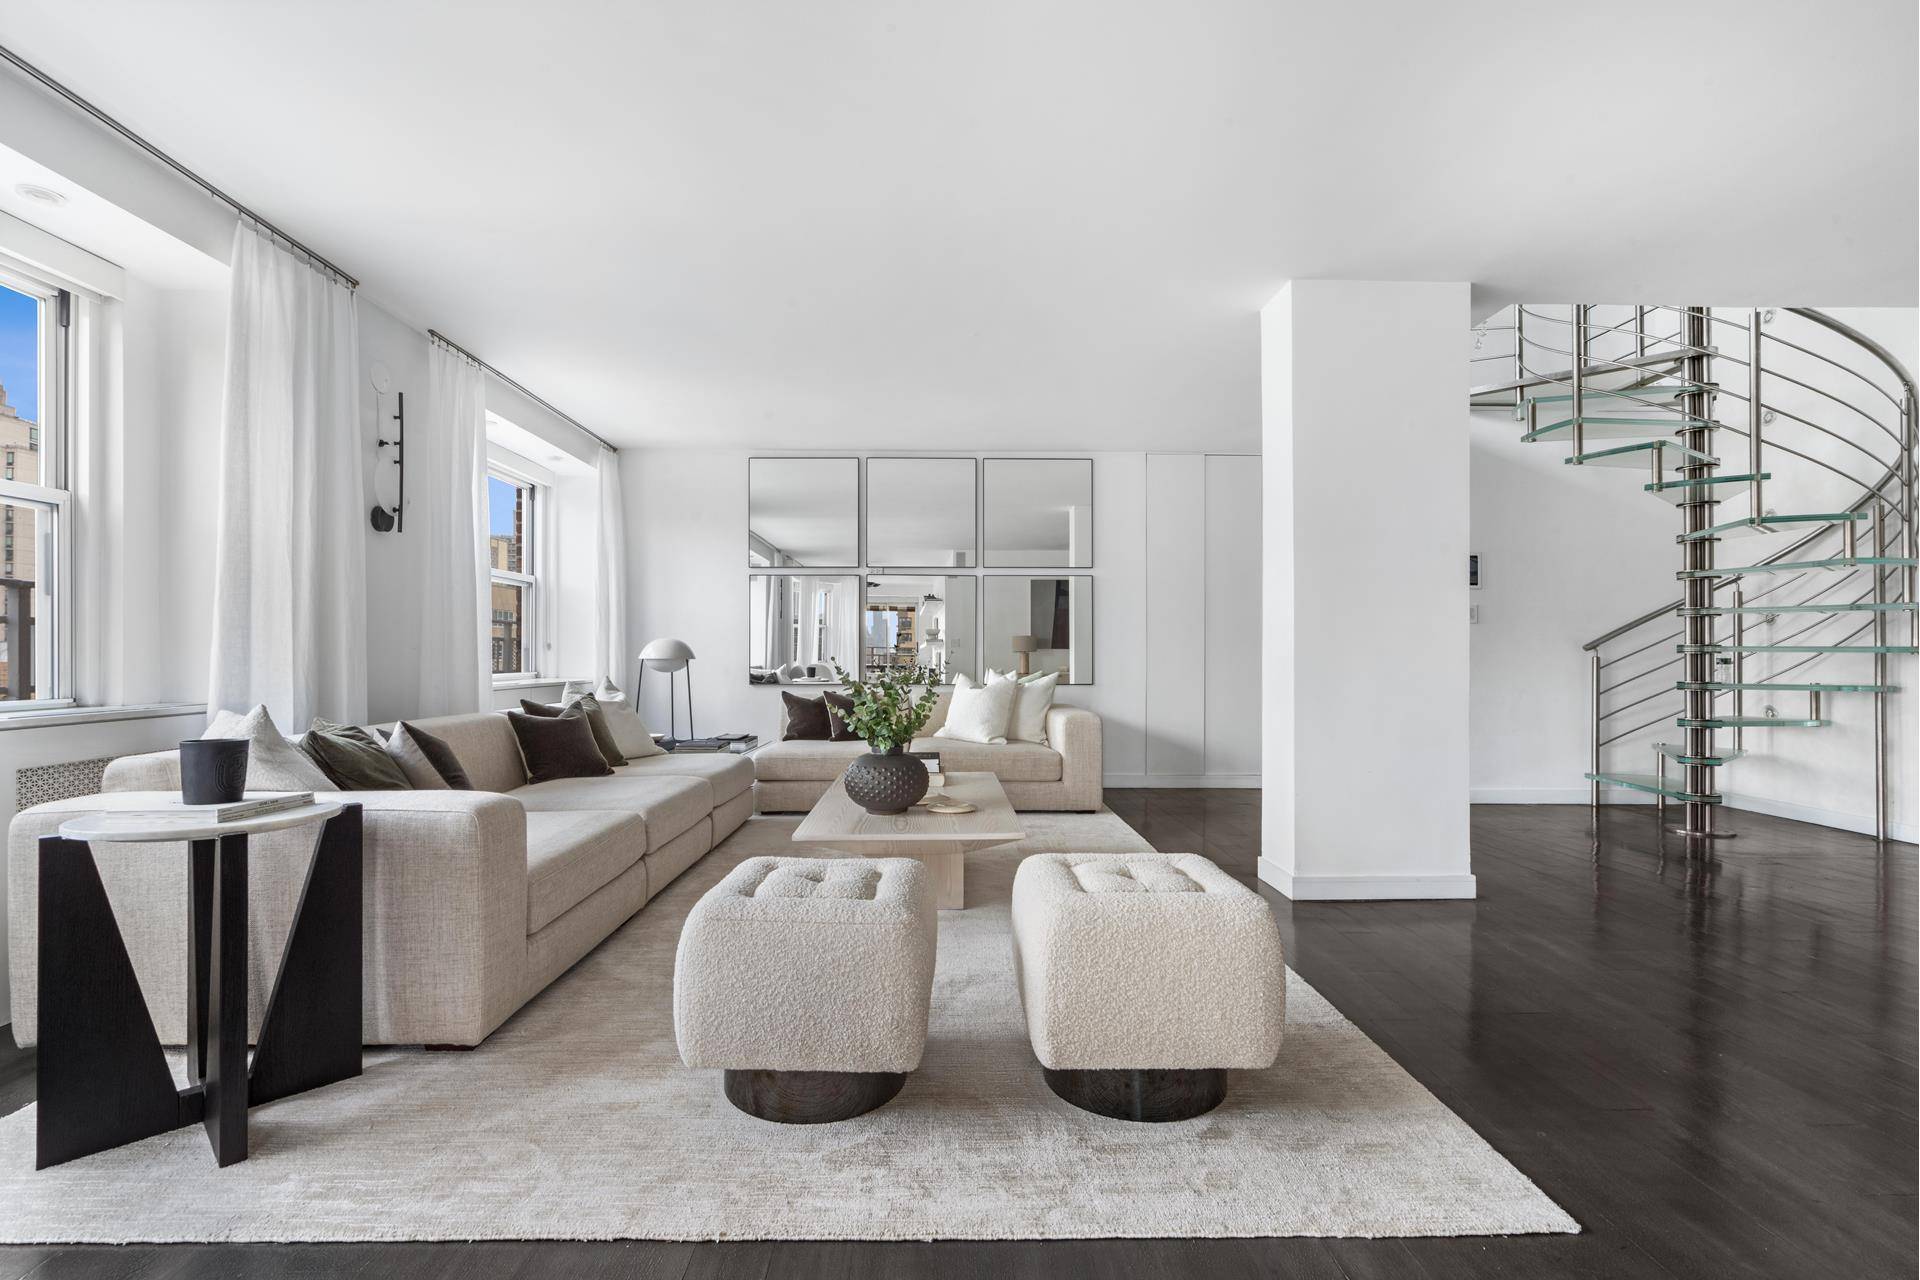 Incredible 6 bedroom, 6. 5 bathroom, duplex penthouse with a wraparound terrace available for sale in the Upper East Side.